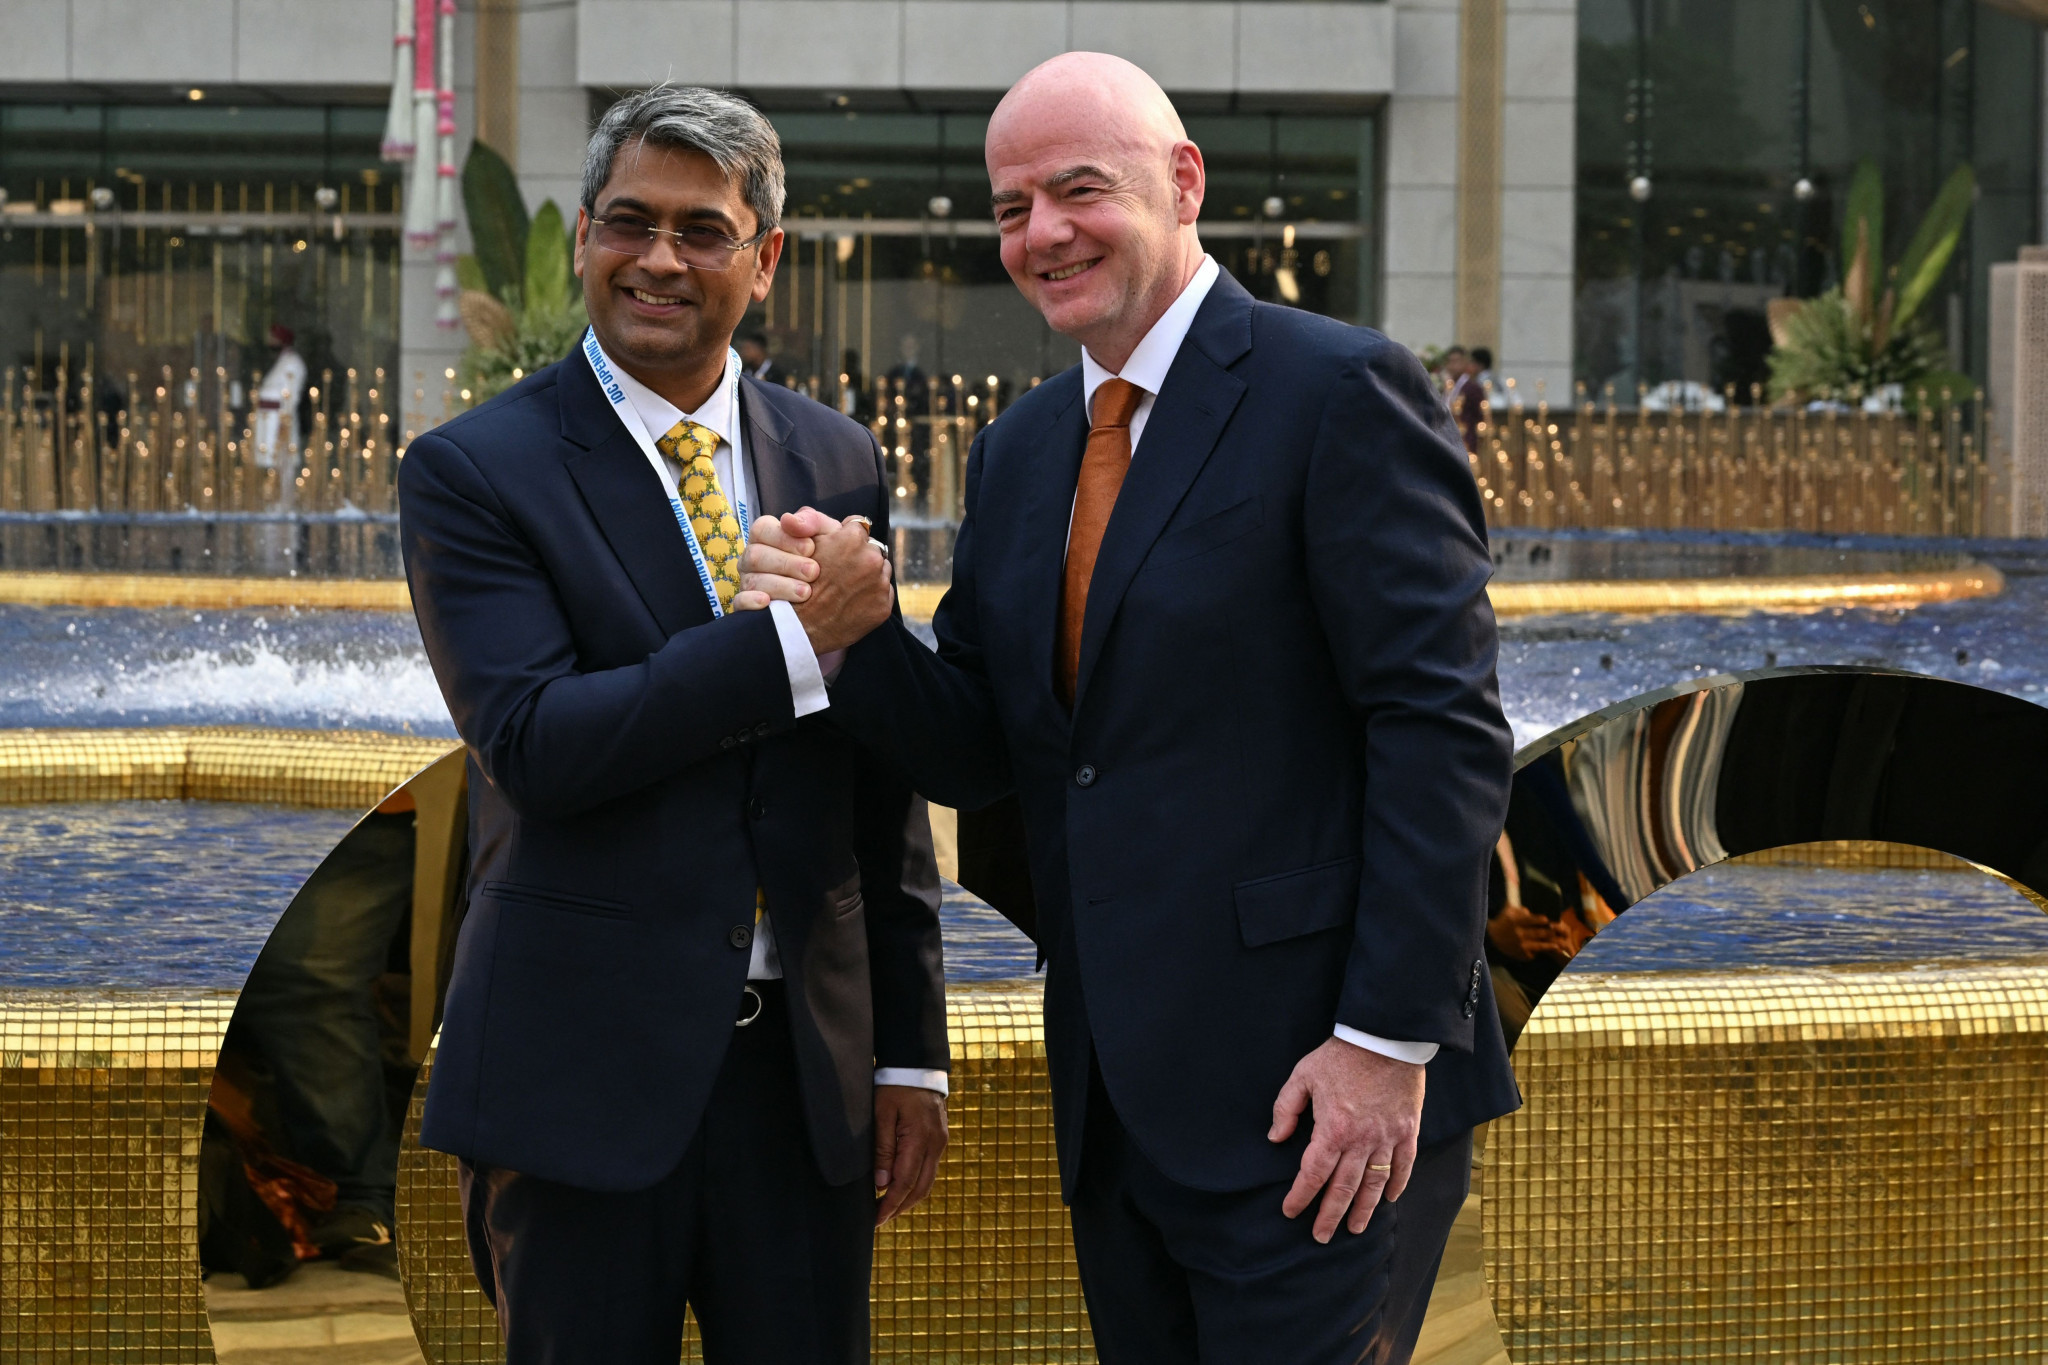 FIFA President and Swiss IOC member Gianni Infantino, right, was joined by All India Football Federation President Kalyan Chaubey, right, for the Opening Ceremony of the IOC Session in Mumbai ©Getty Images